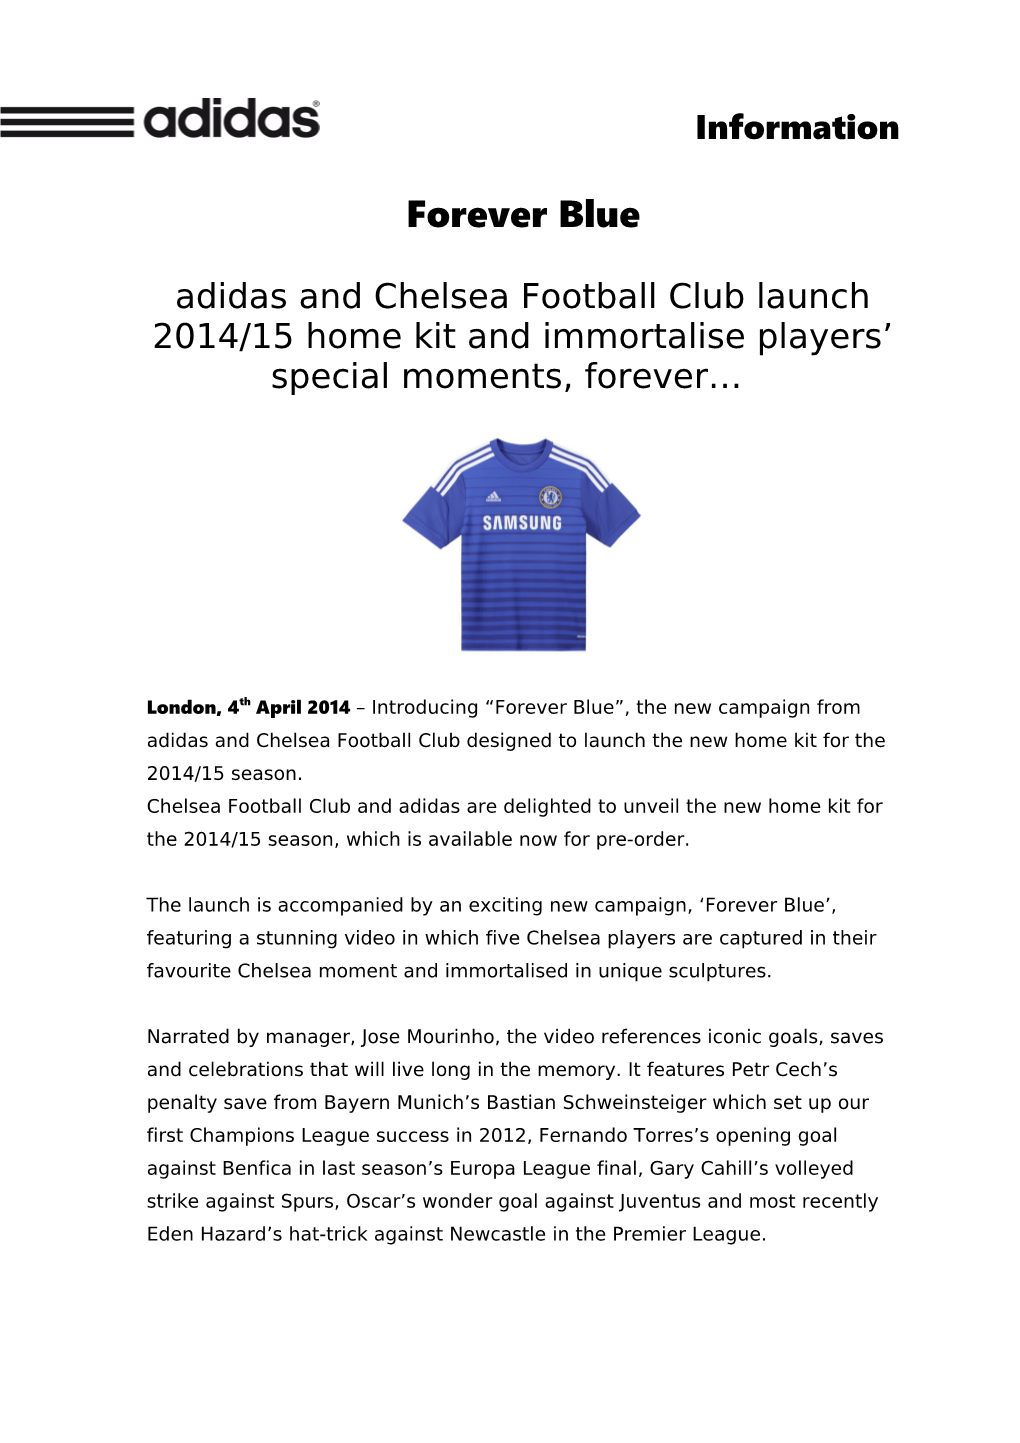 Adidas Brand Director, Nick Craggs Comments on the New Launch